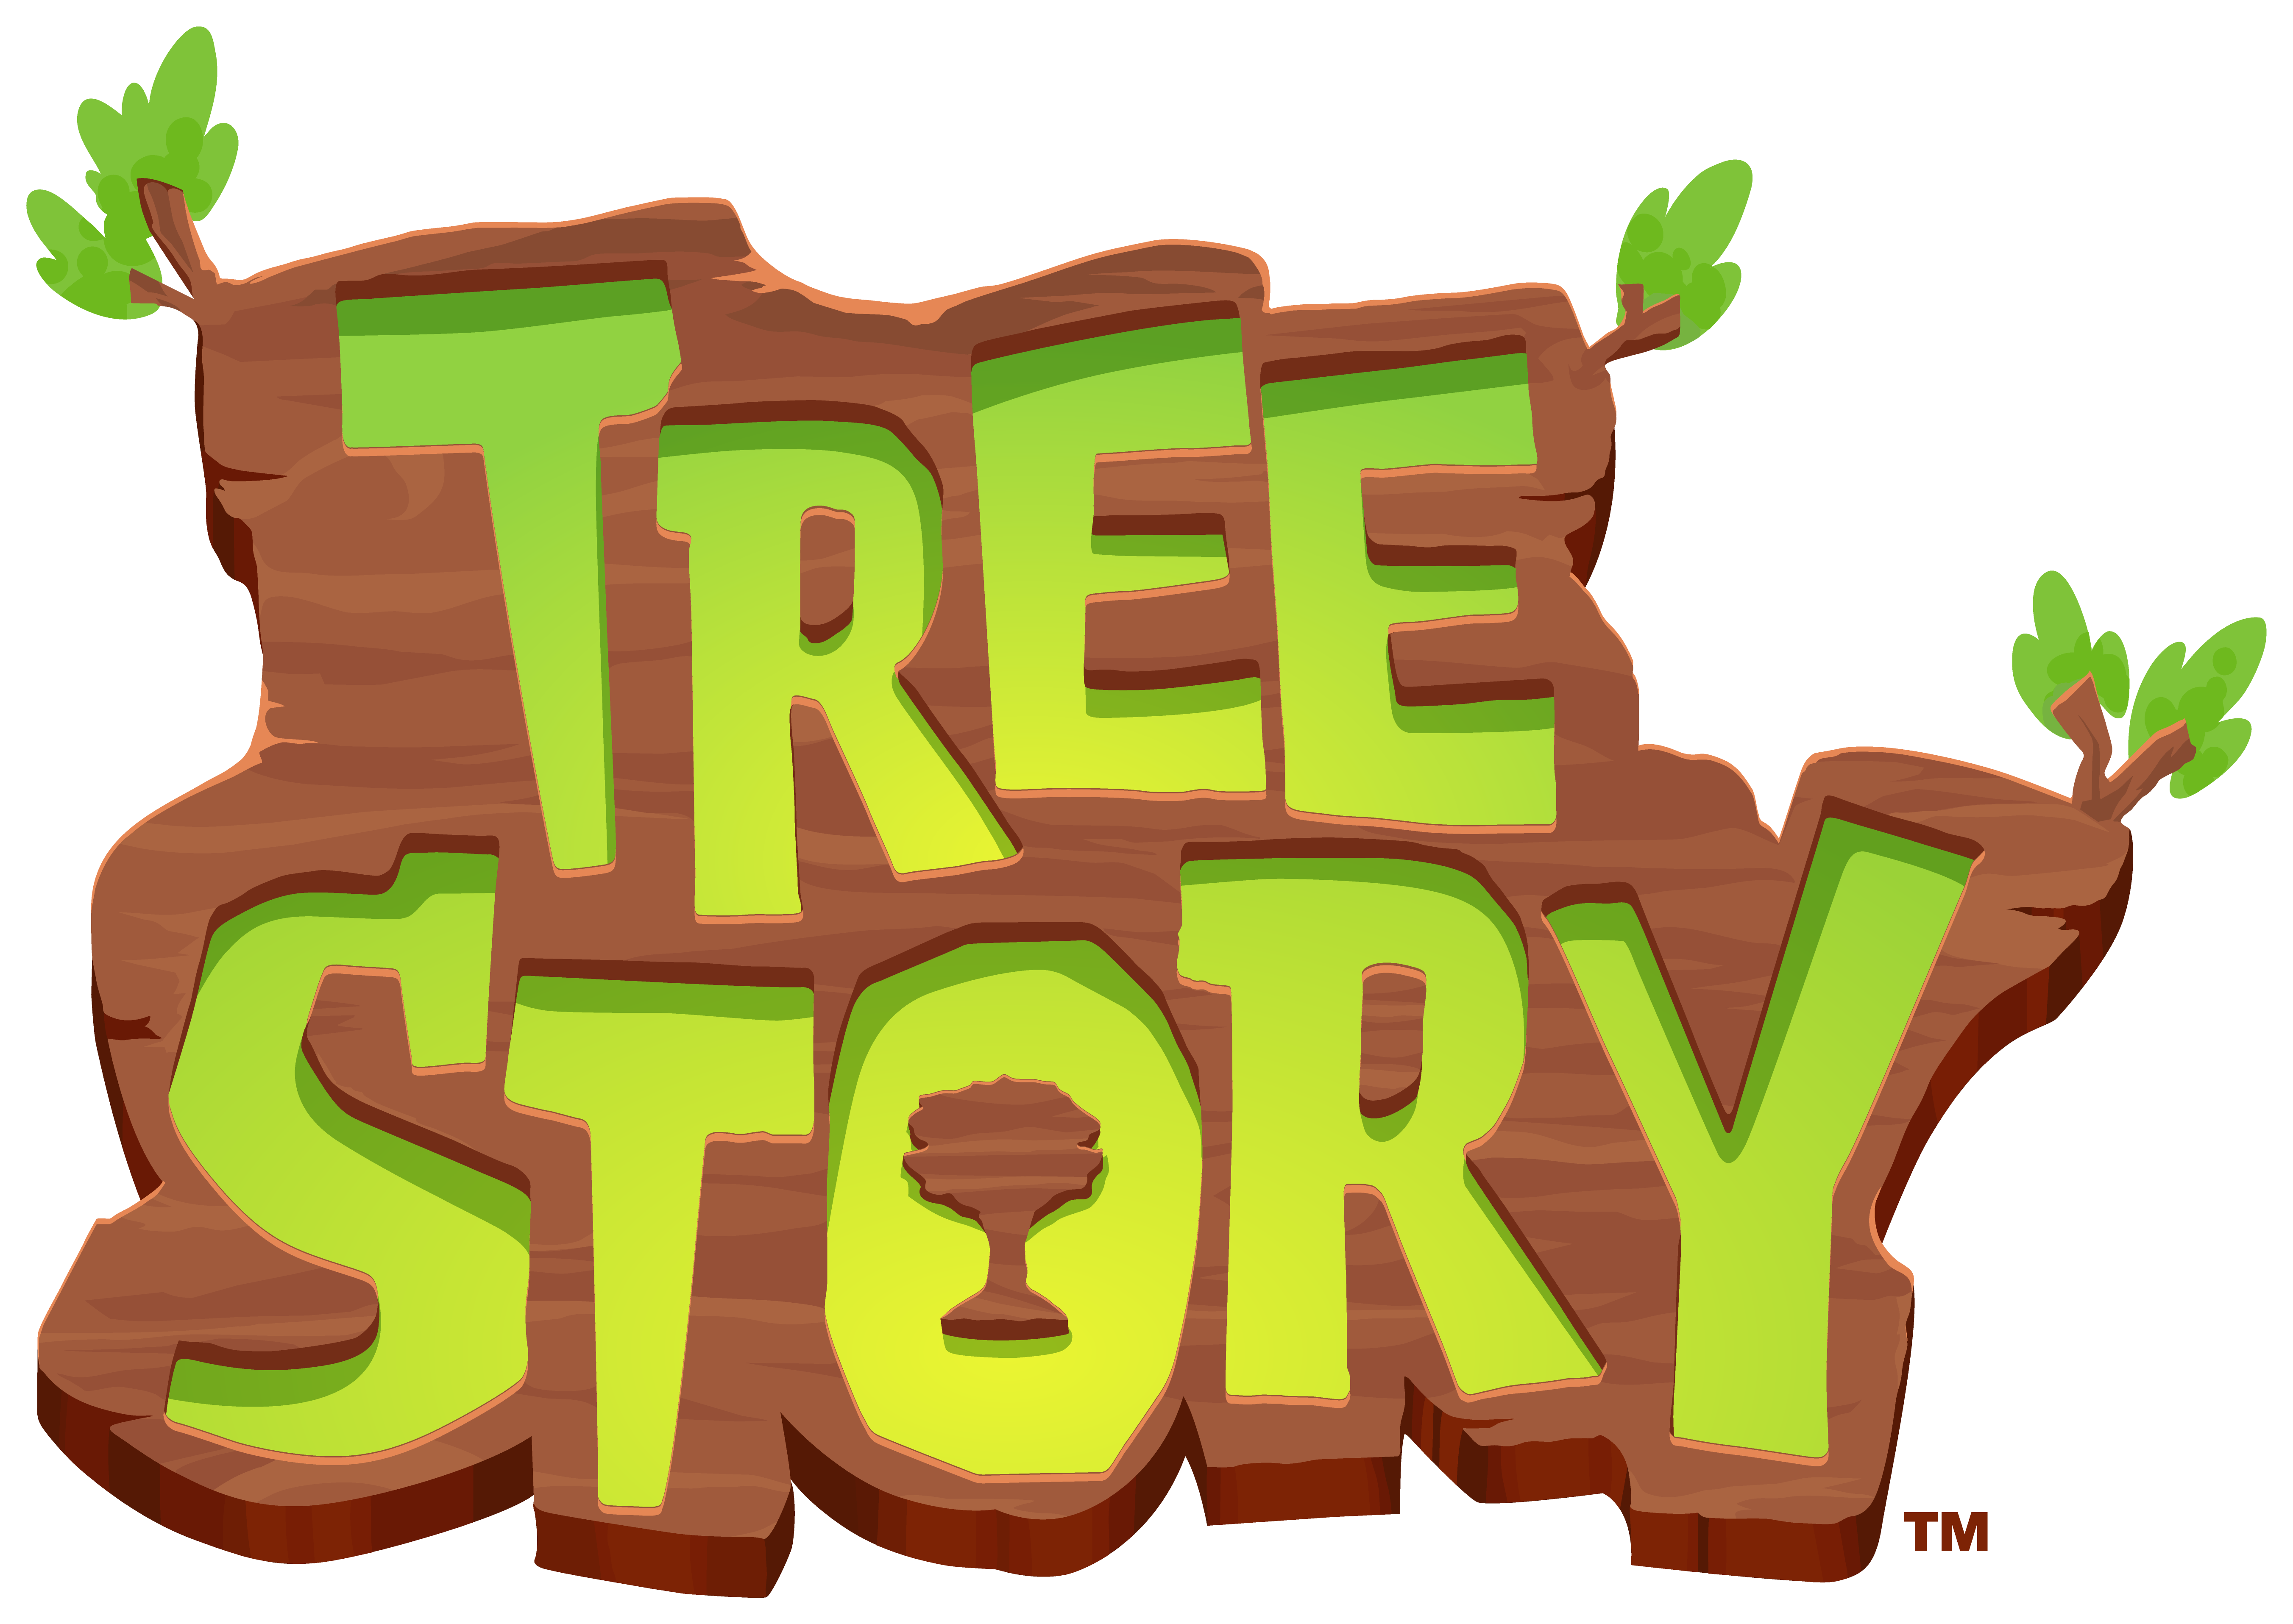 What do actrees and. Games clipart mobile game